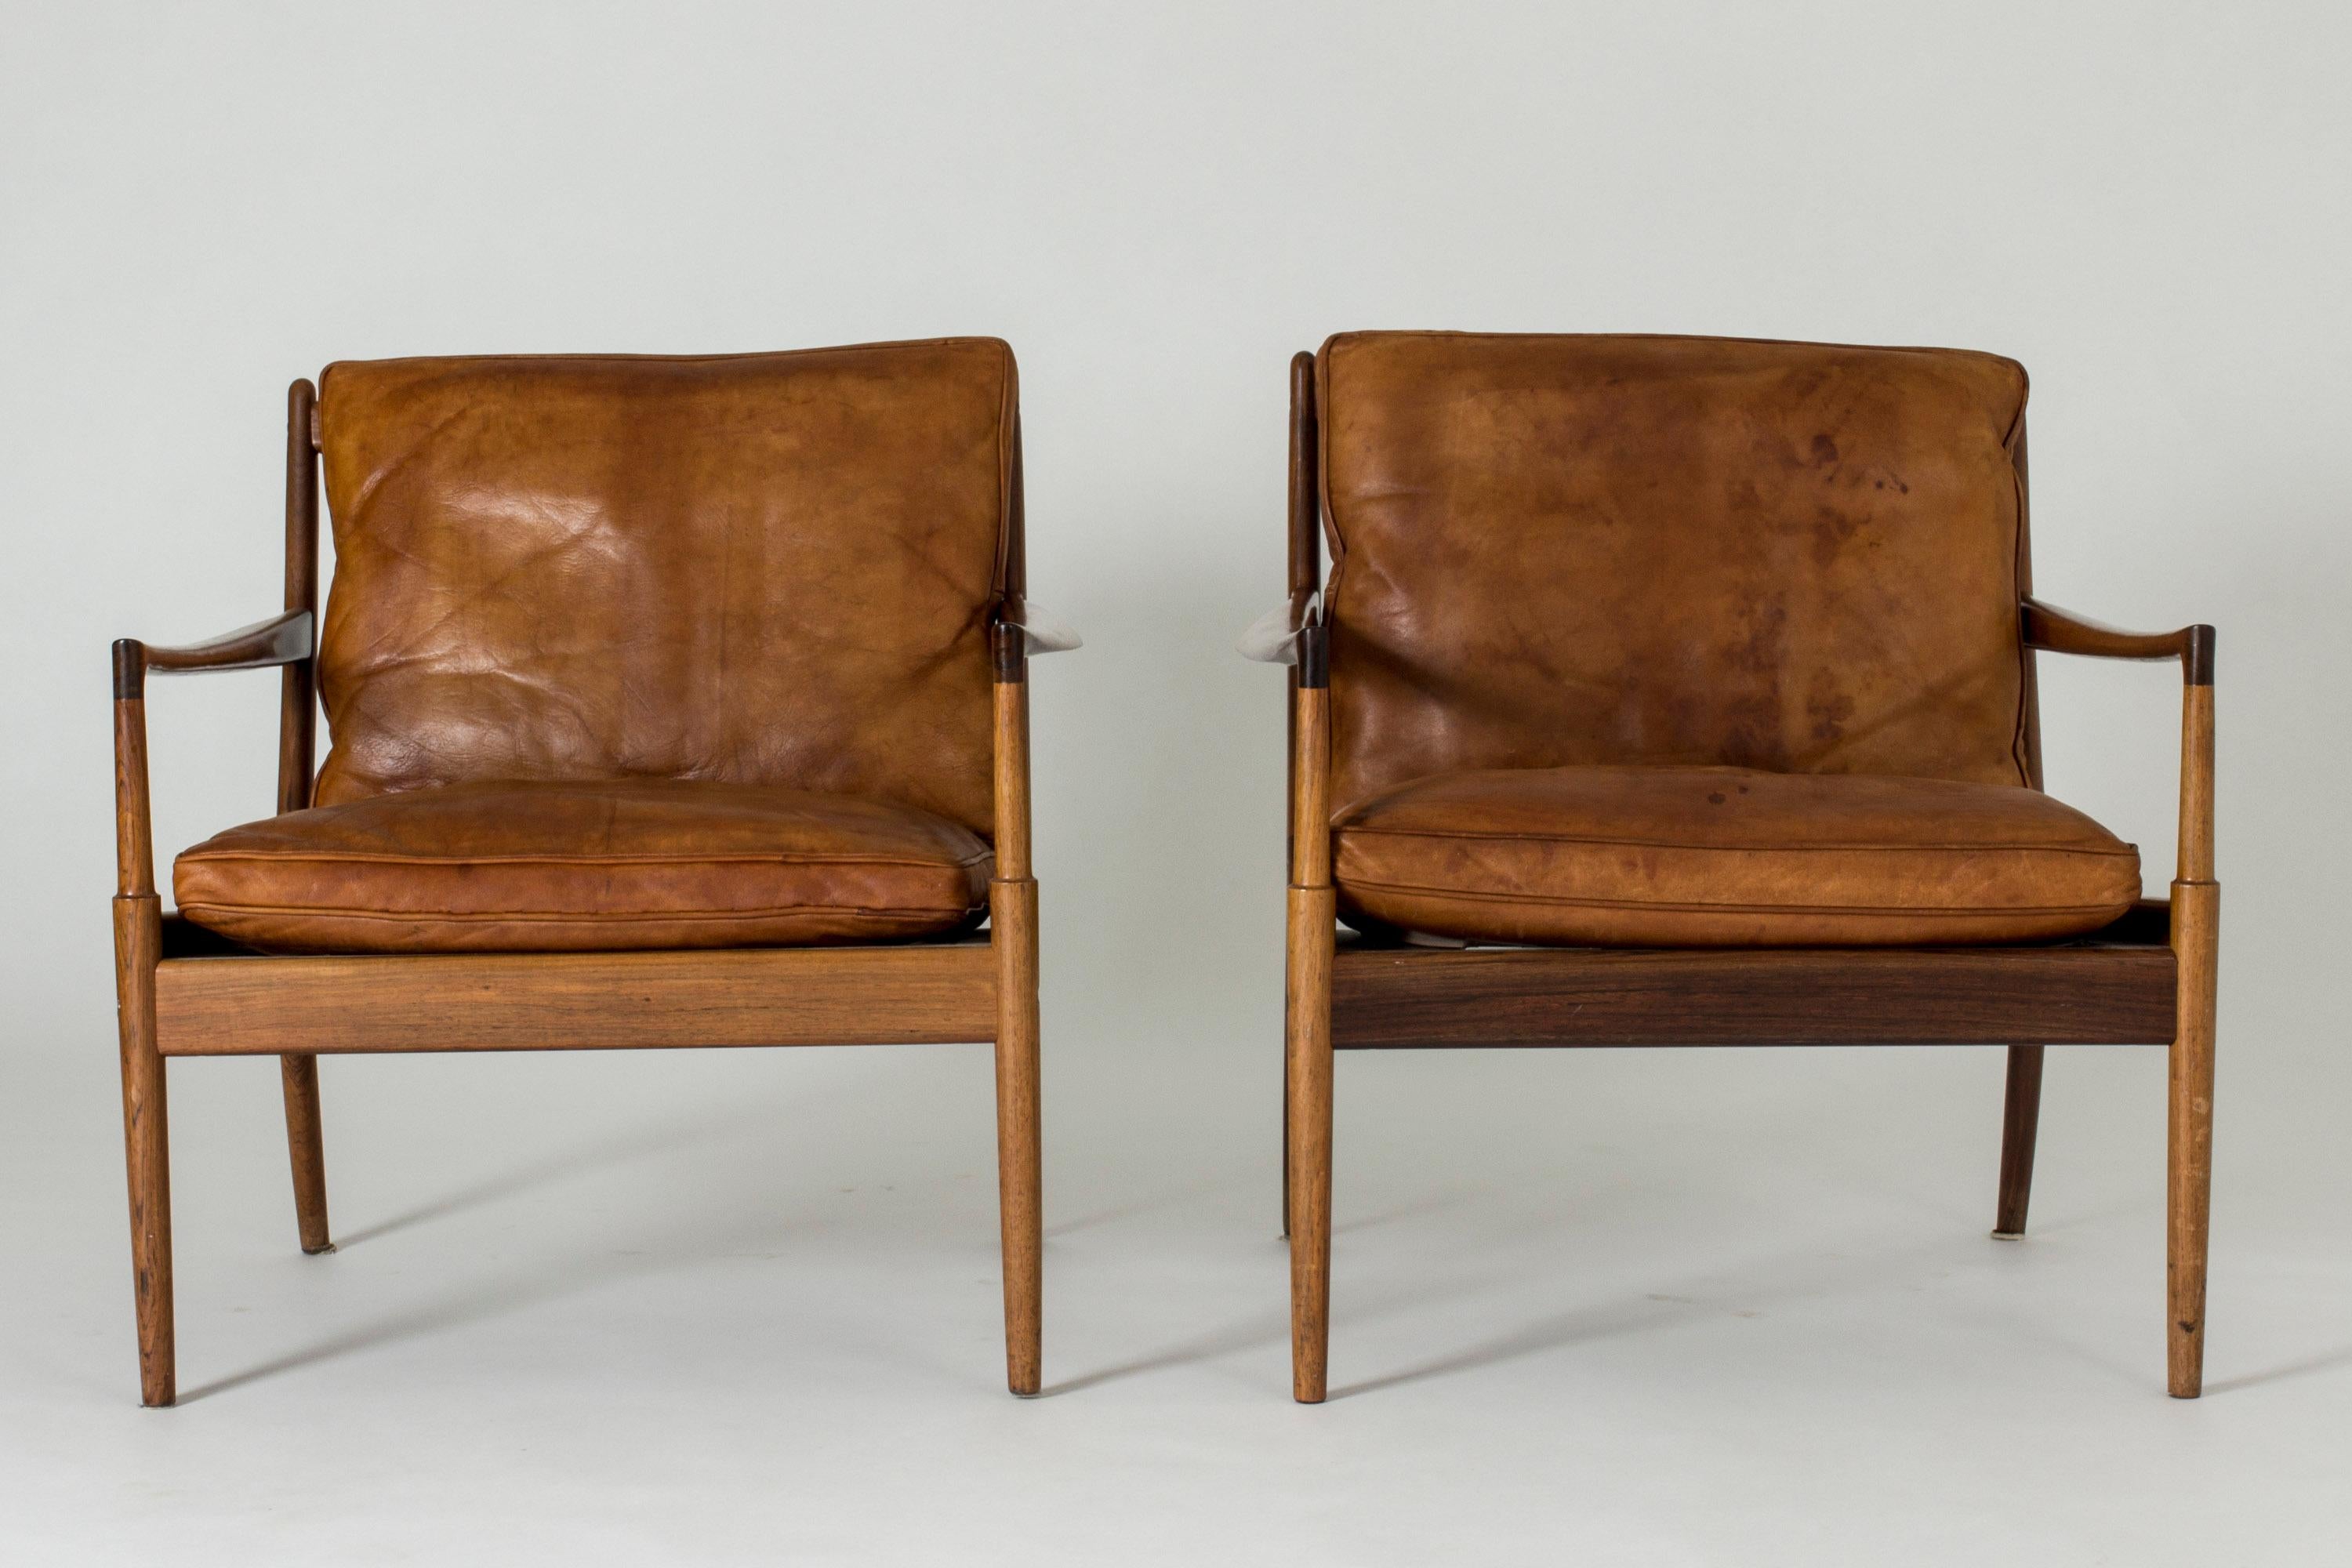 Mid-20th Century Pair of Rosewood and Leather “Samsö” Lounge Chairs by Ib Kofod Larsen